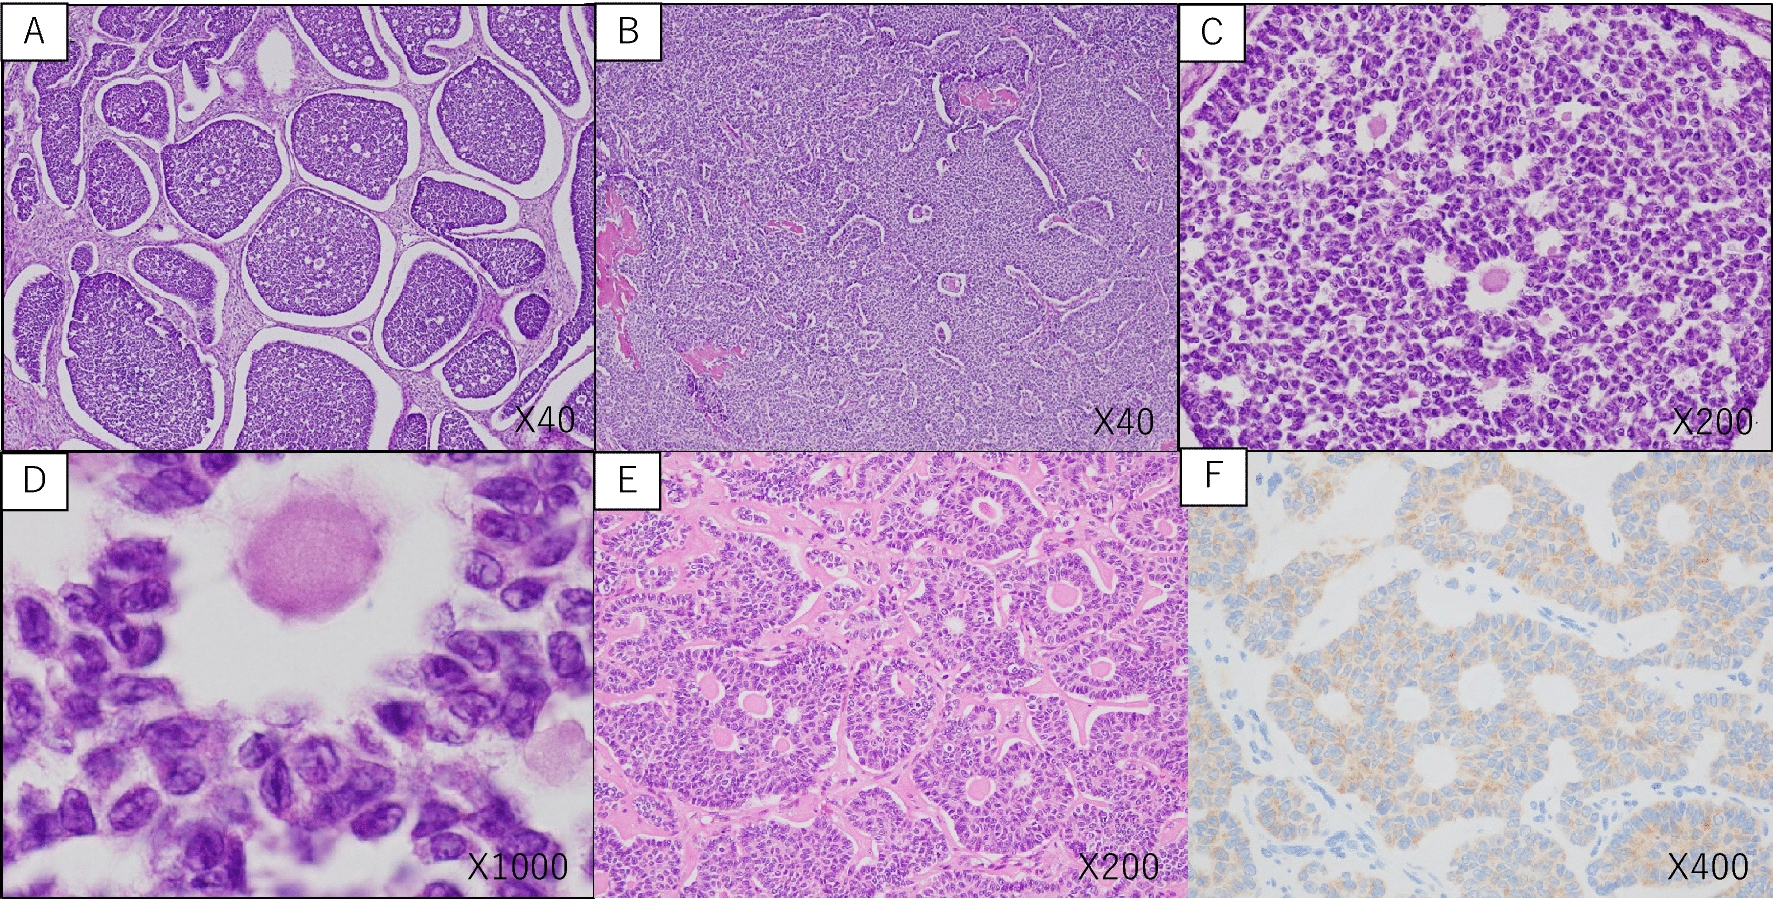 Complete reduction surgery of a huge recurrent adult granulosa cell tumor after neoadjuvant chemotherapy